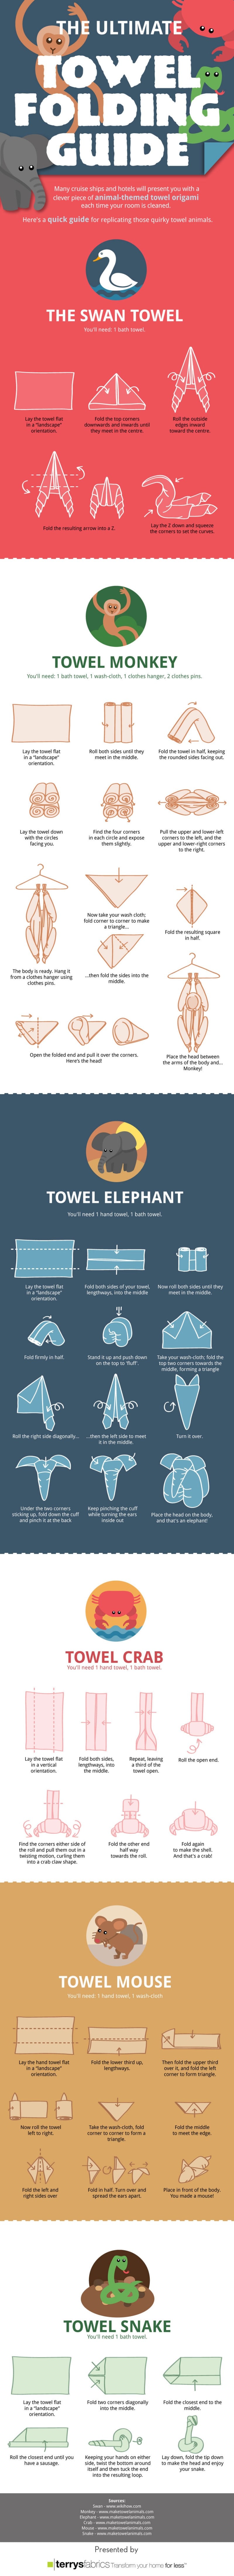 the-ultimate-towel-folding-guide1